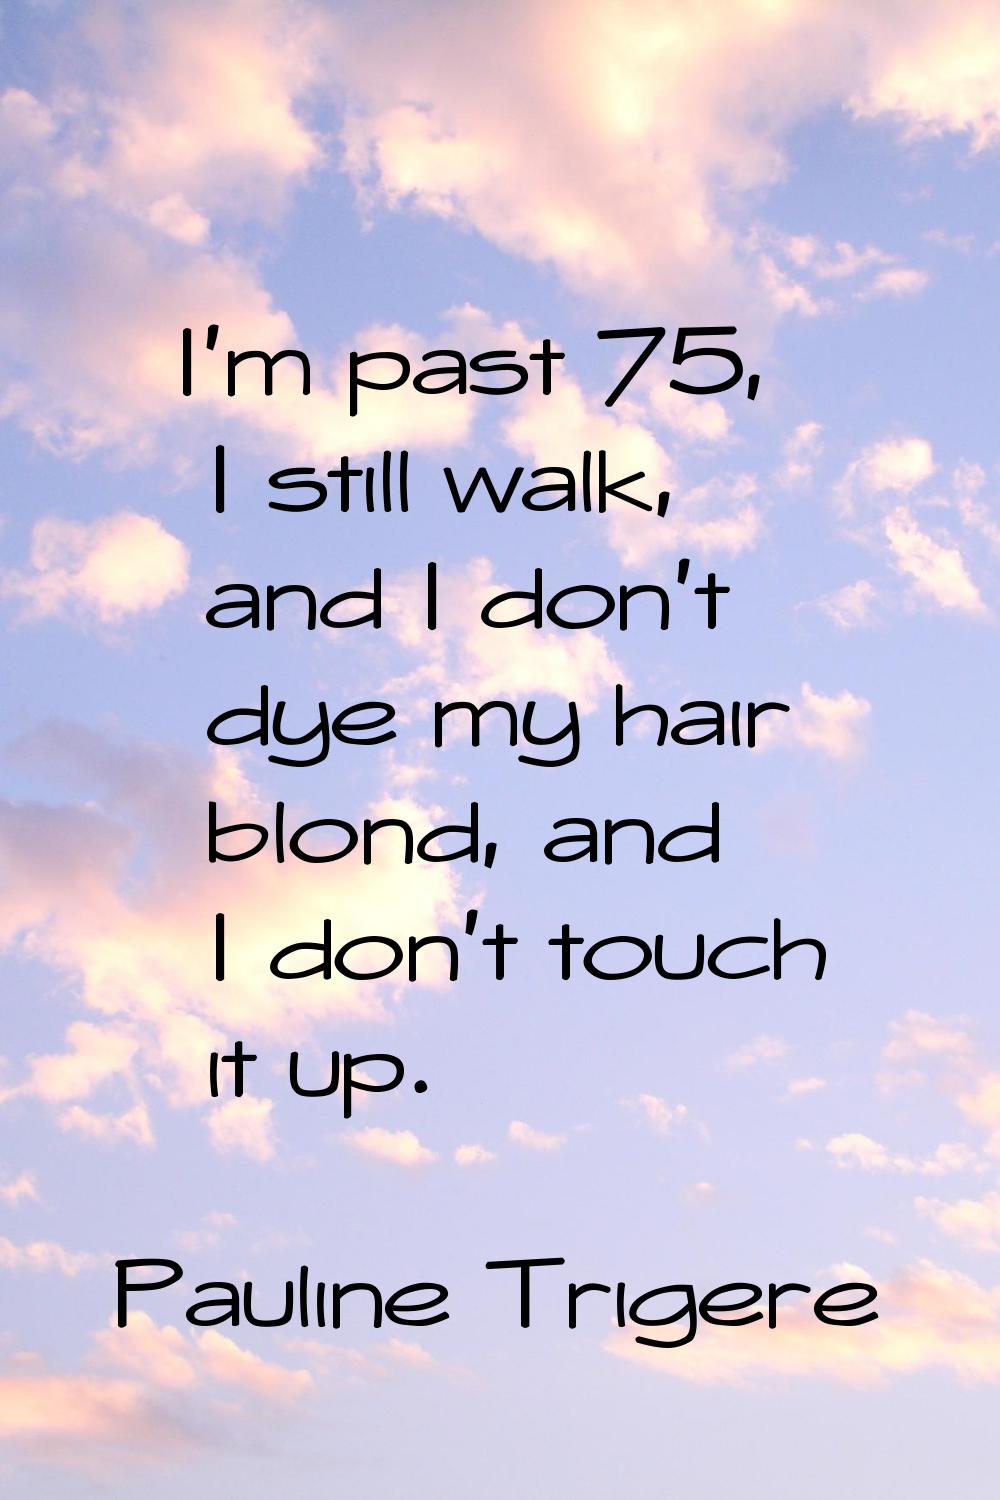 I'm past 75, I still walk, and I don't dye my hair blond, and I don't touch it up.